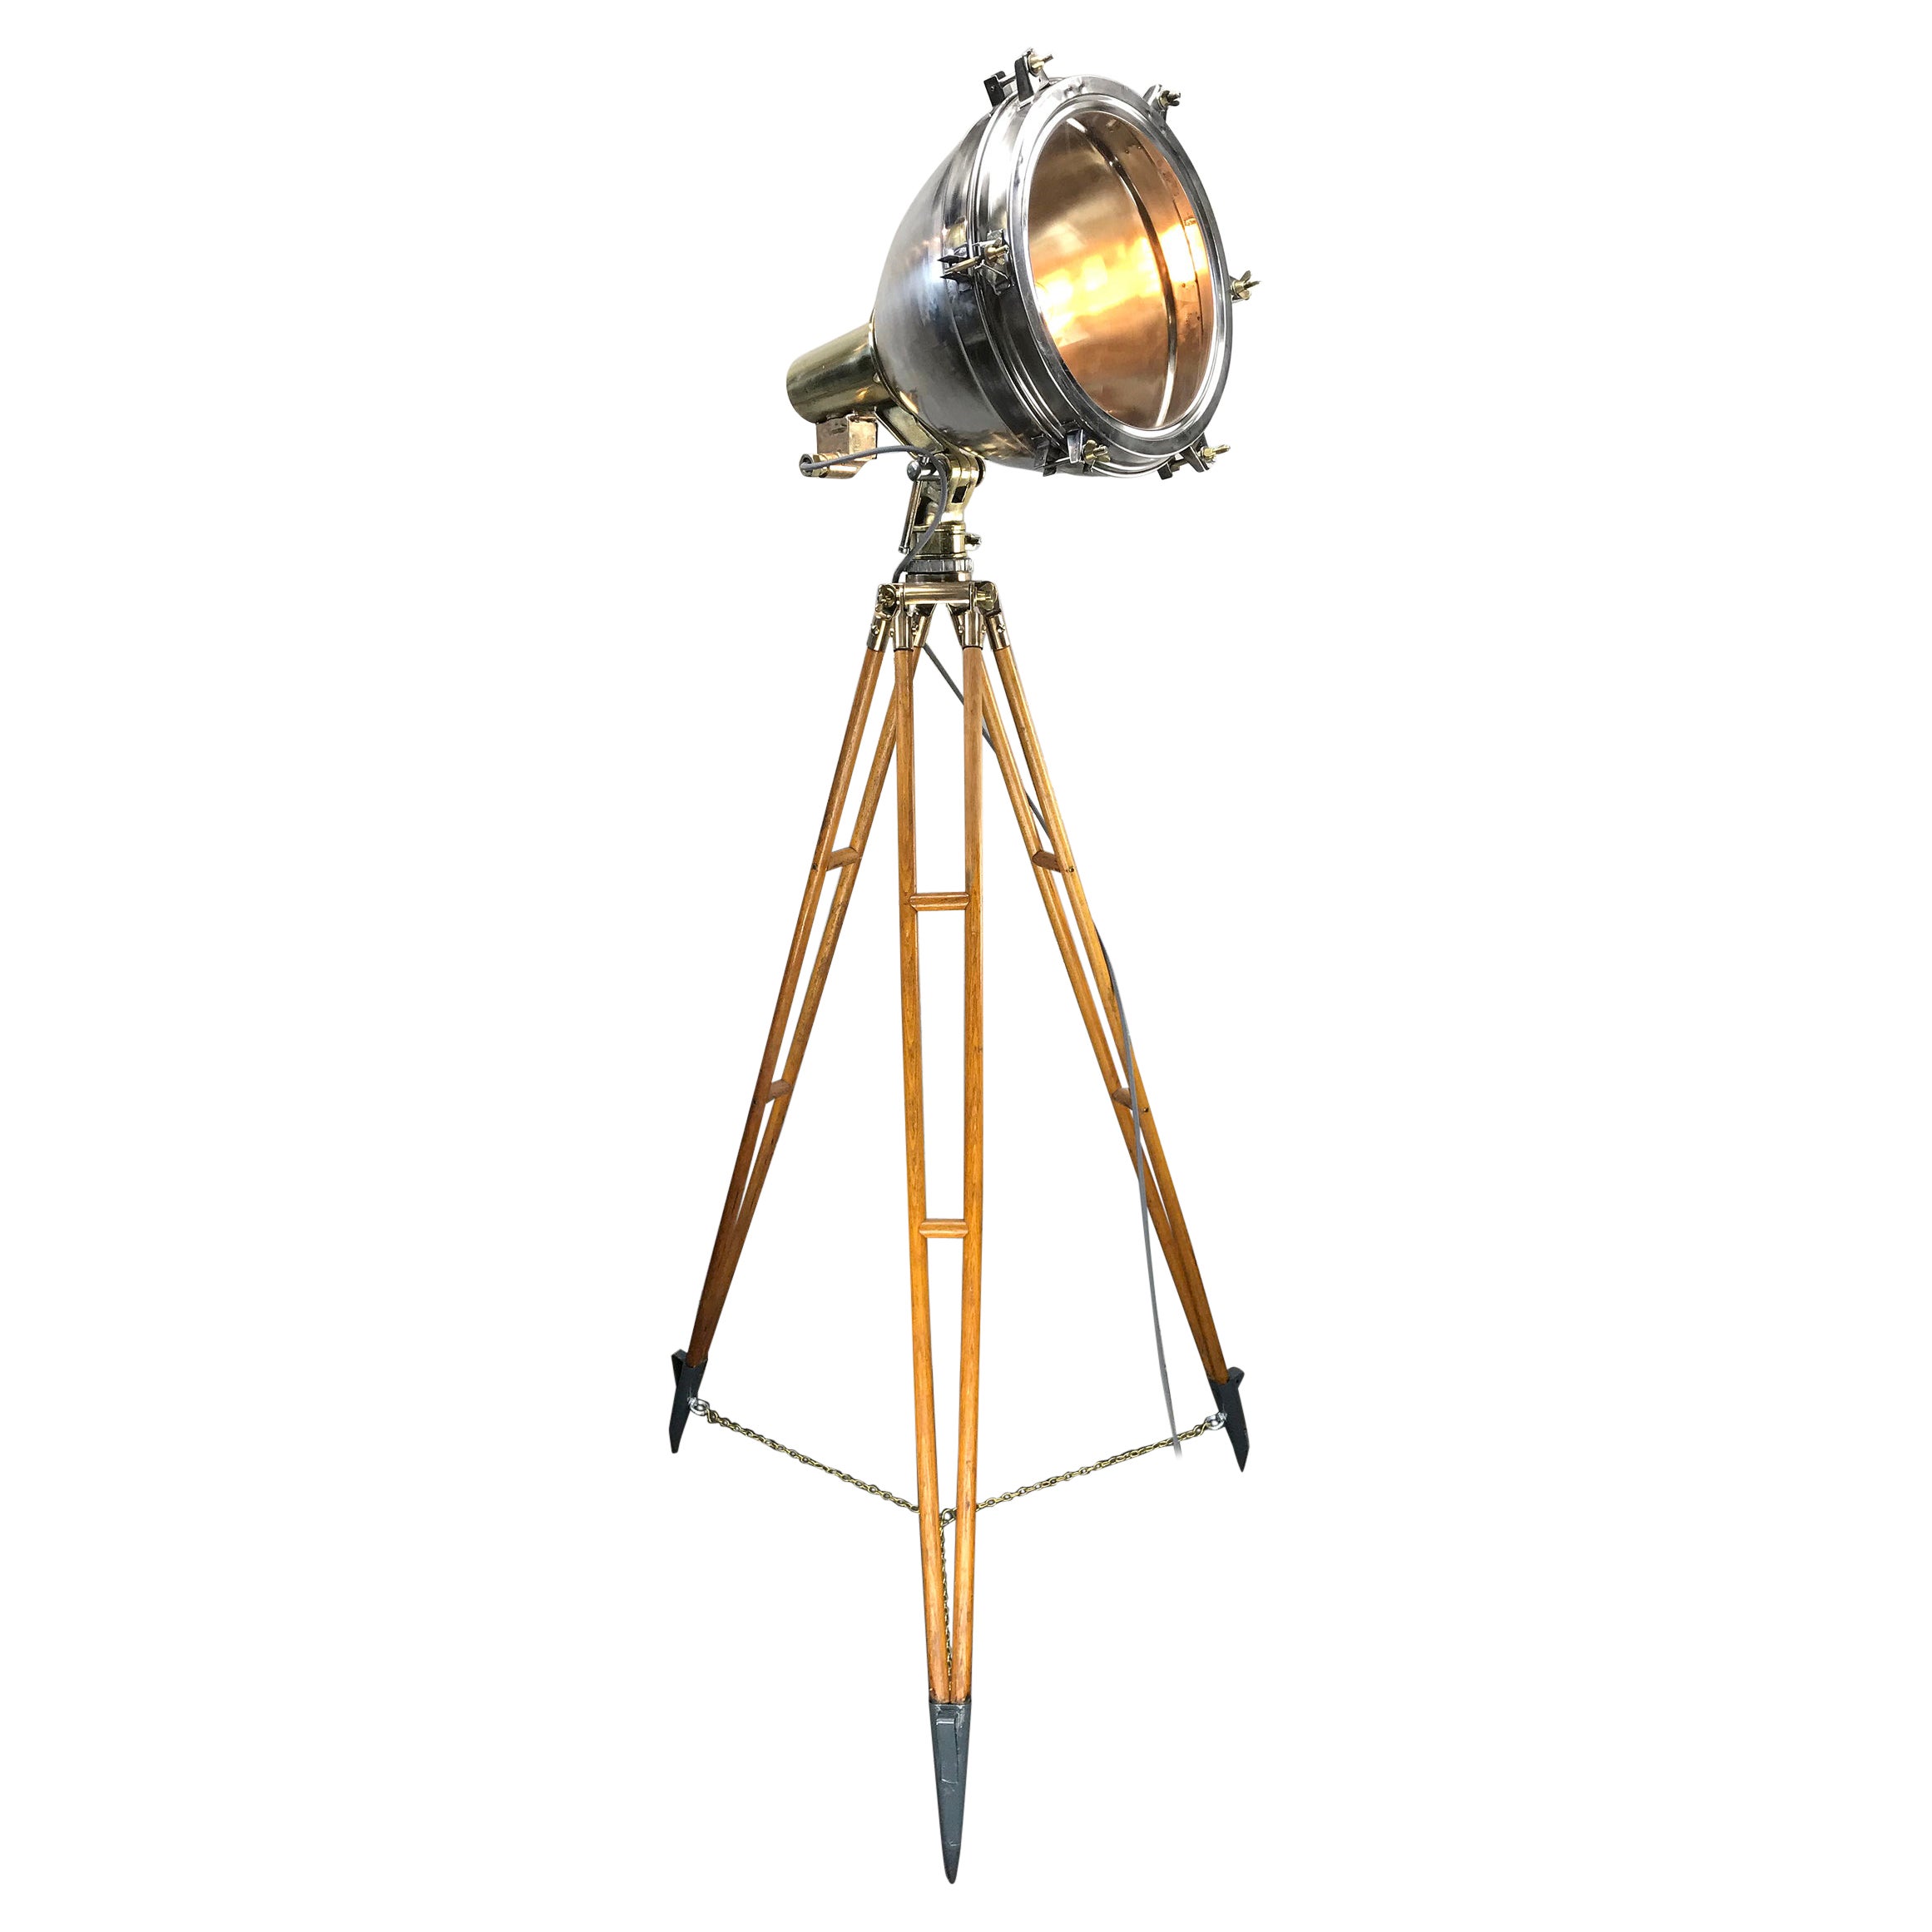 1970s Japanese Industrial Brass, Bronze and Stainless Steel Search Light Tripod